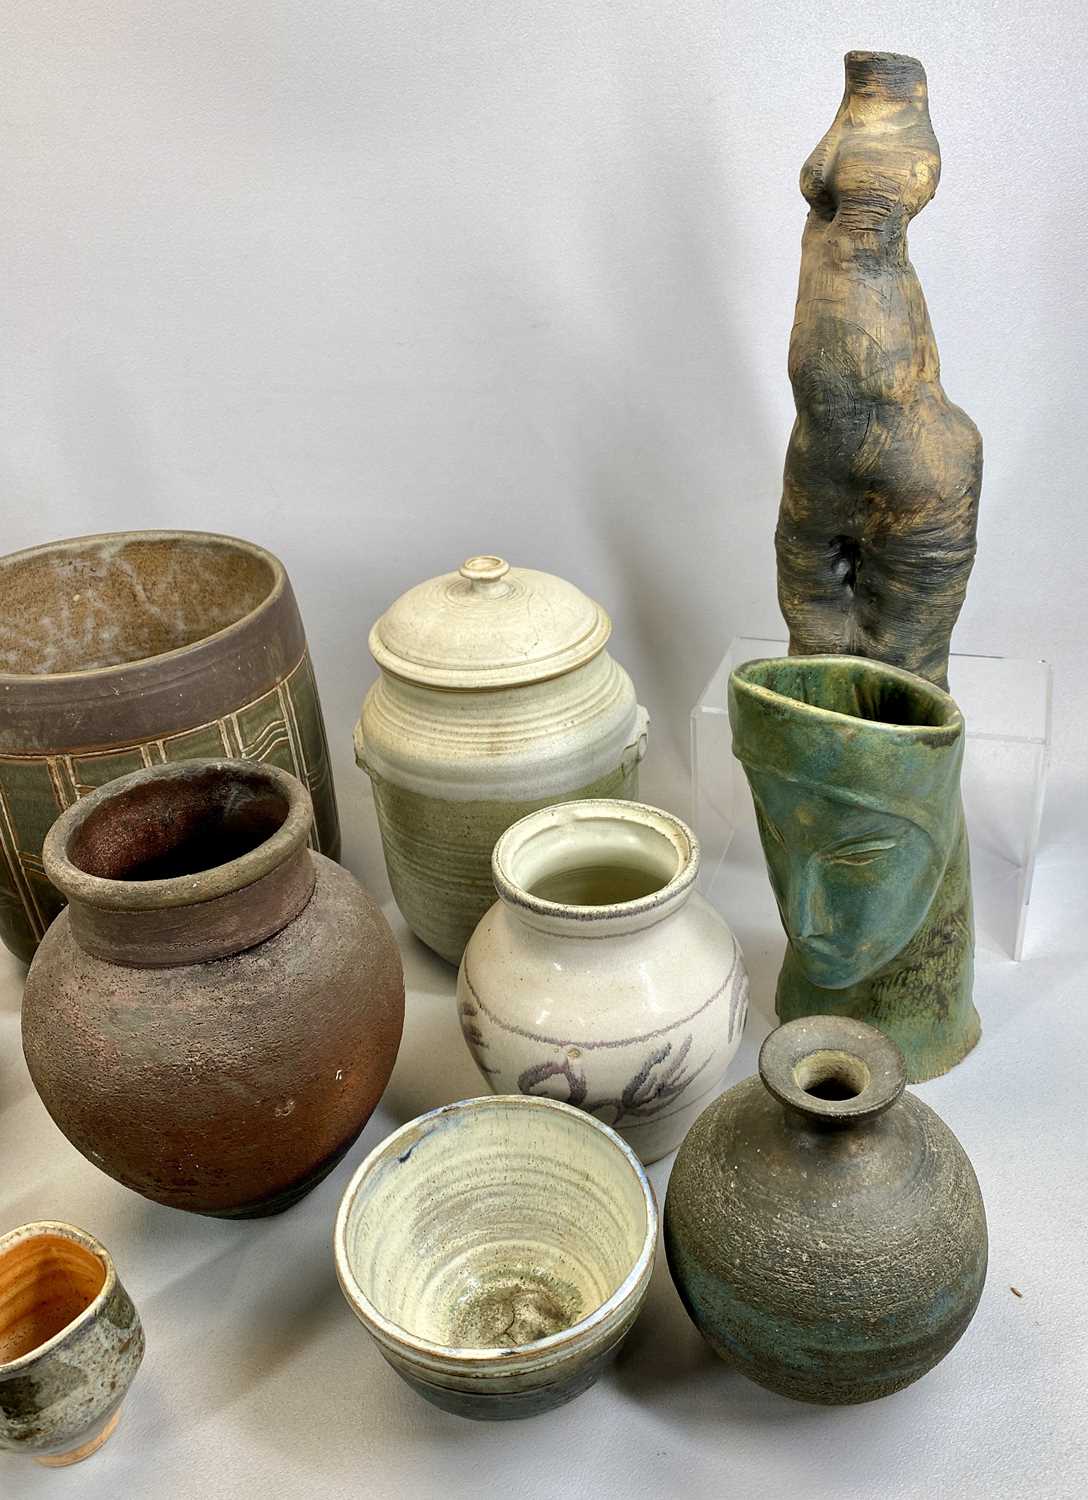 GROUP OF MIXED STUDIO POTTERY, figural vase, signed 'K H' (Kate Hyde), 25cms H, incised bottle - Image 2 of 3